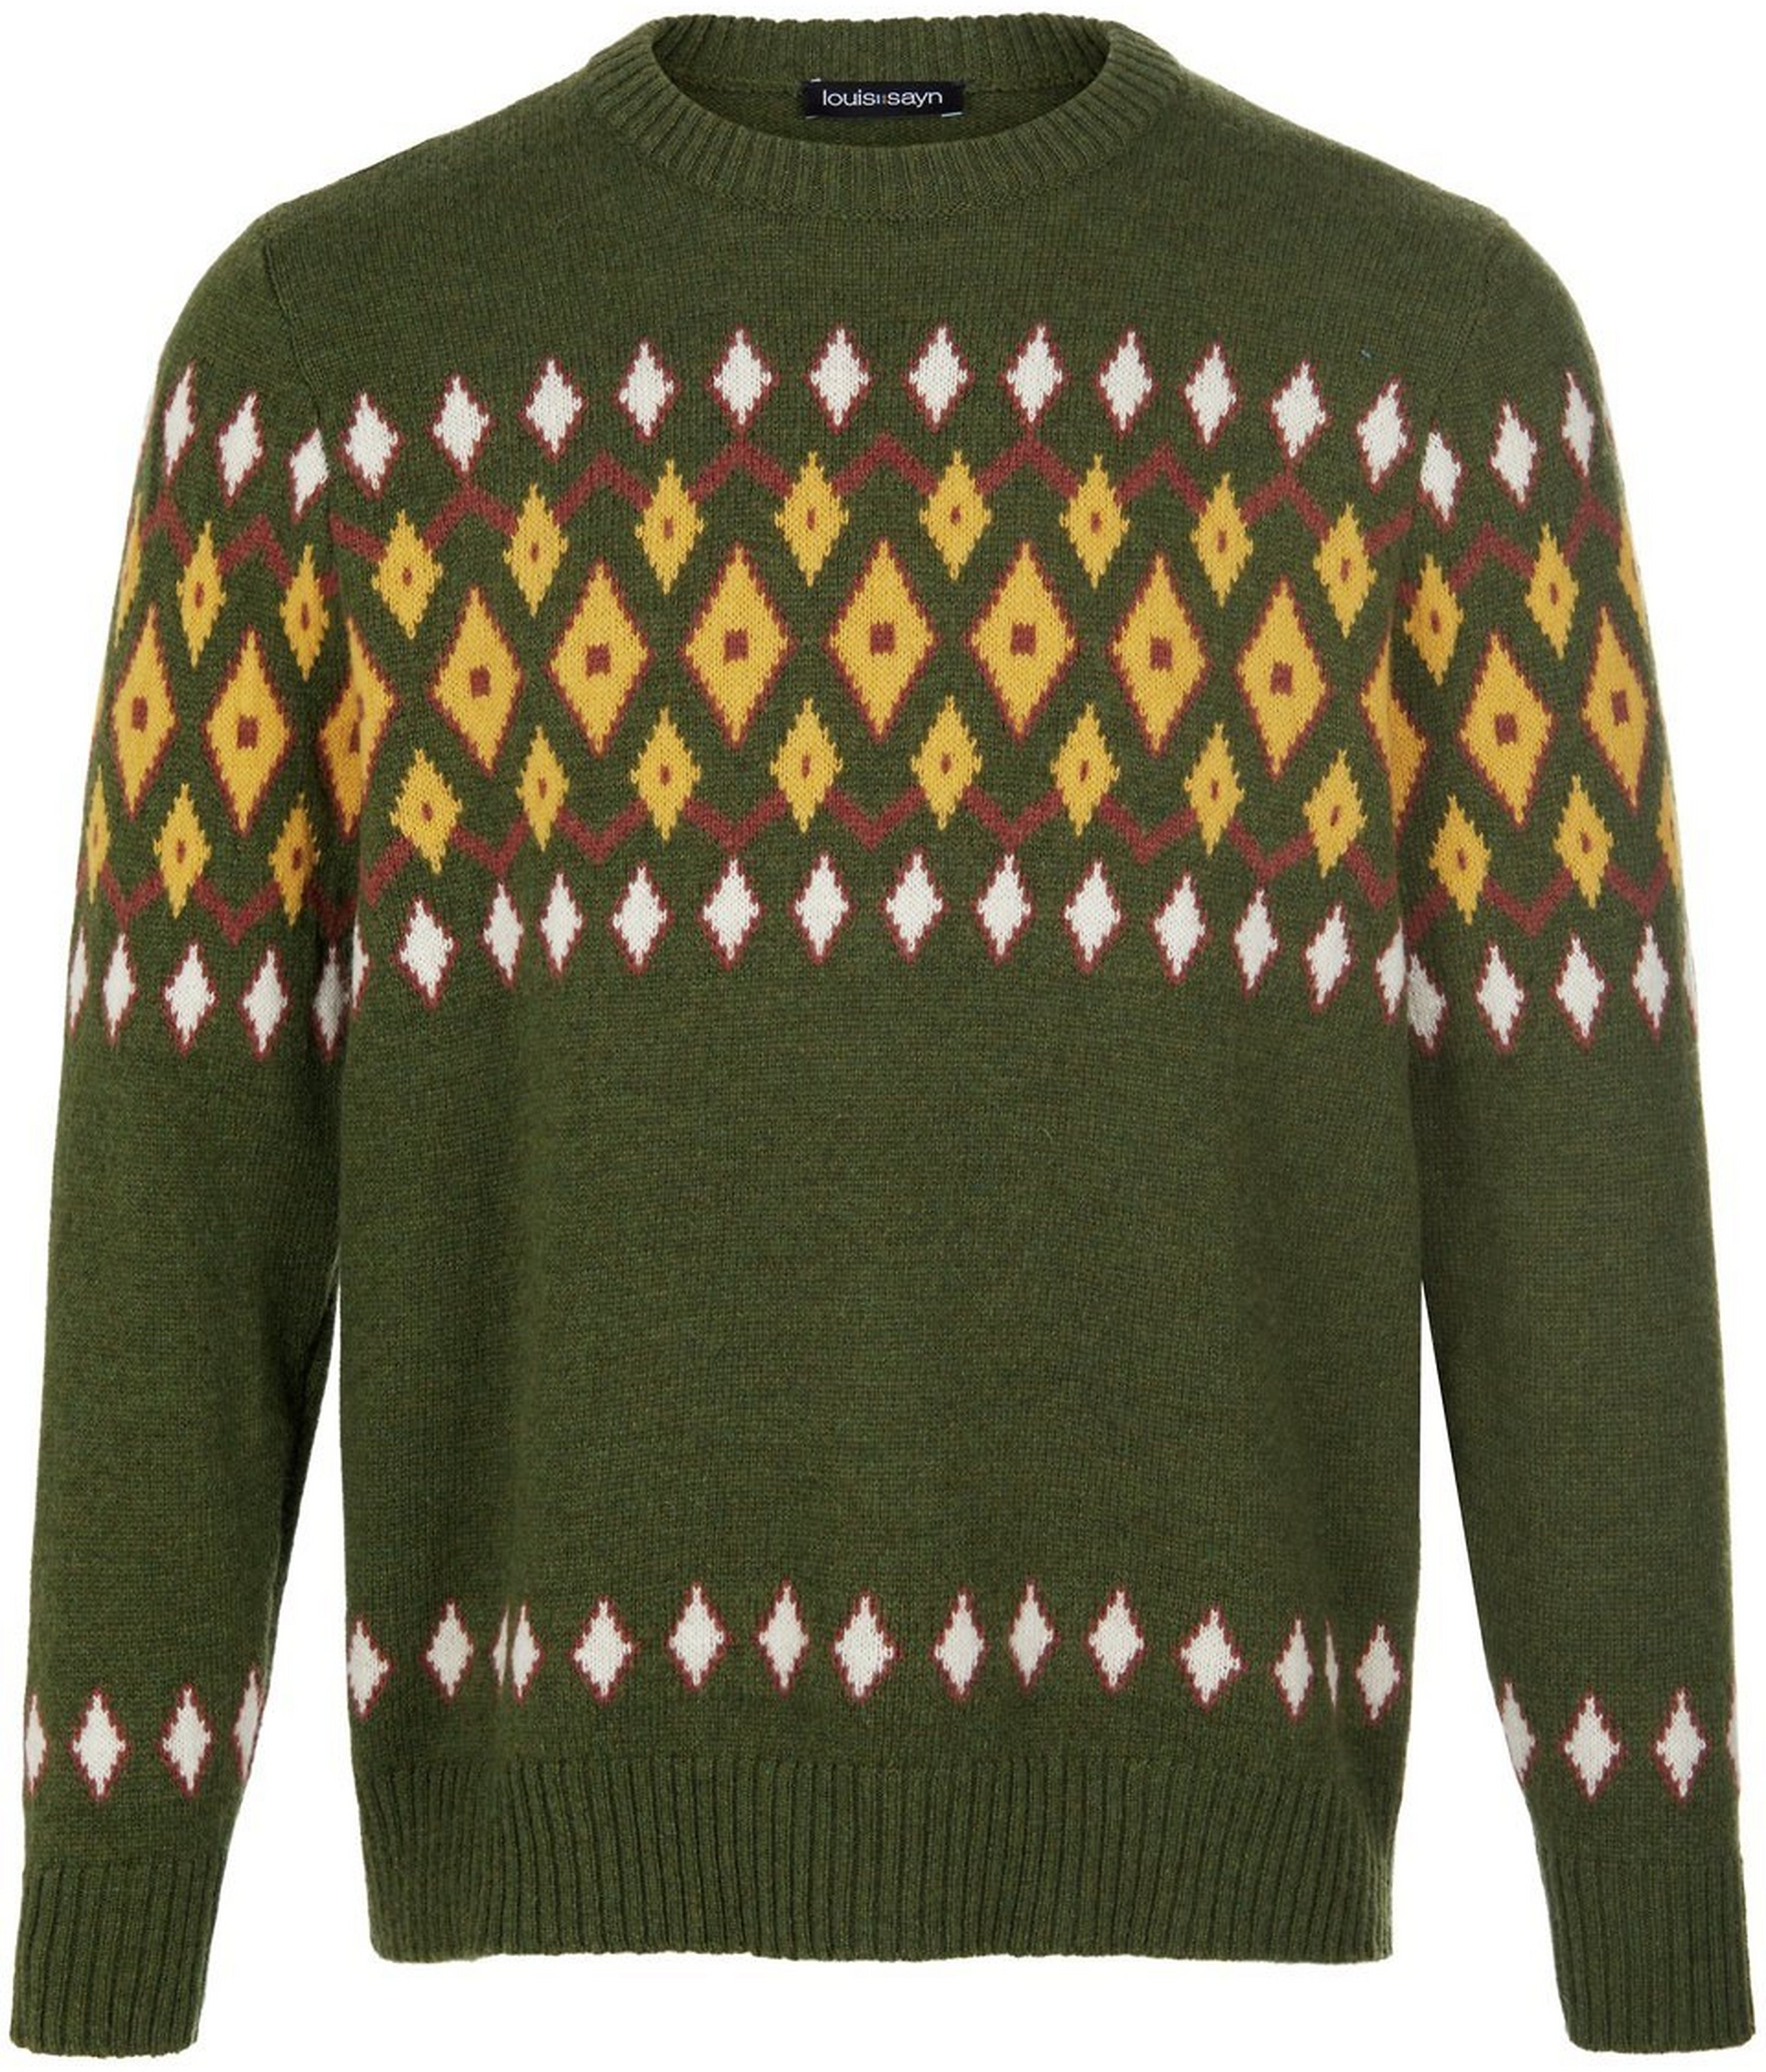 Le pull manches longues  Louis Sayn vert